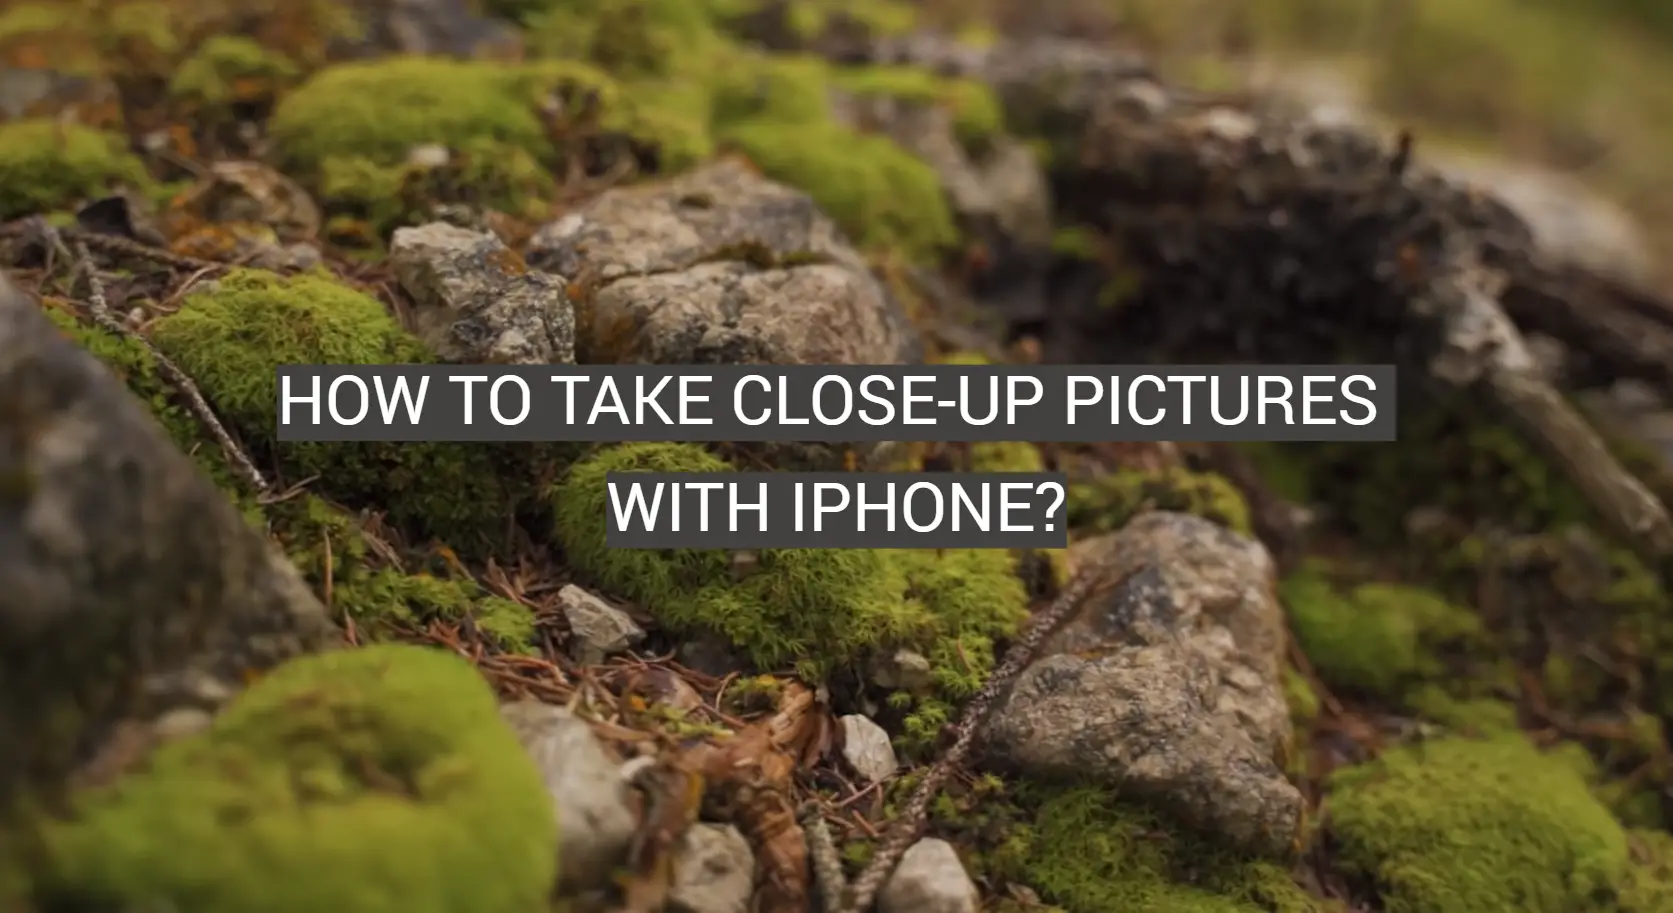 How to Take Close-Up Pictures With iPhone?